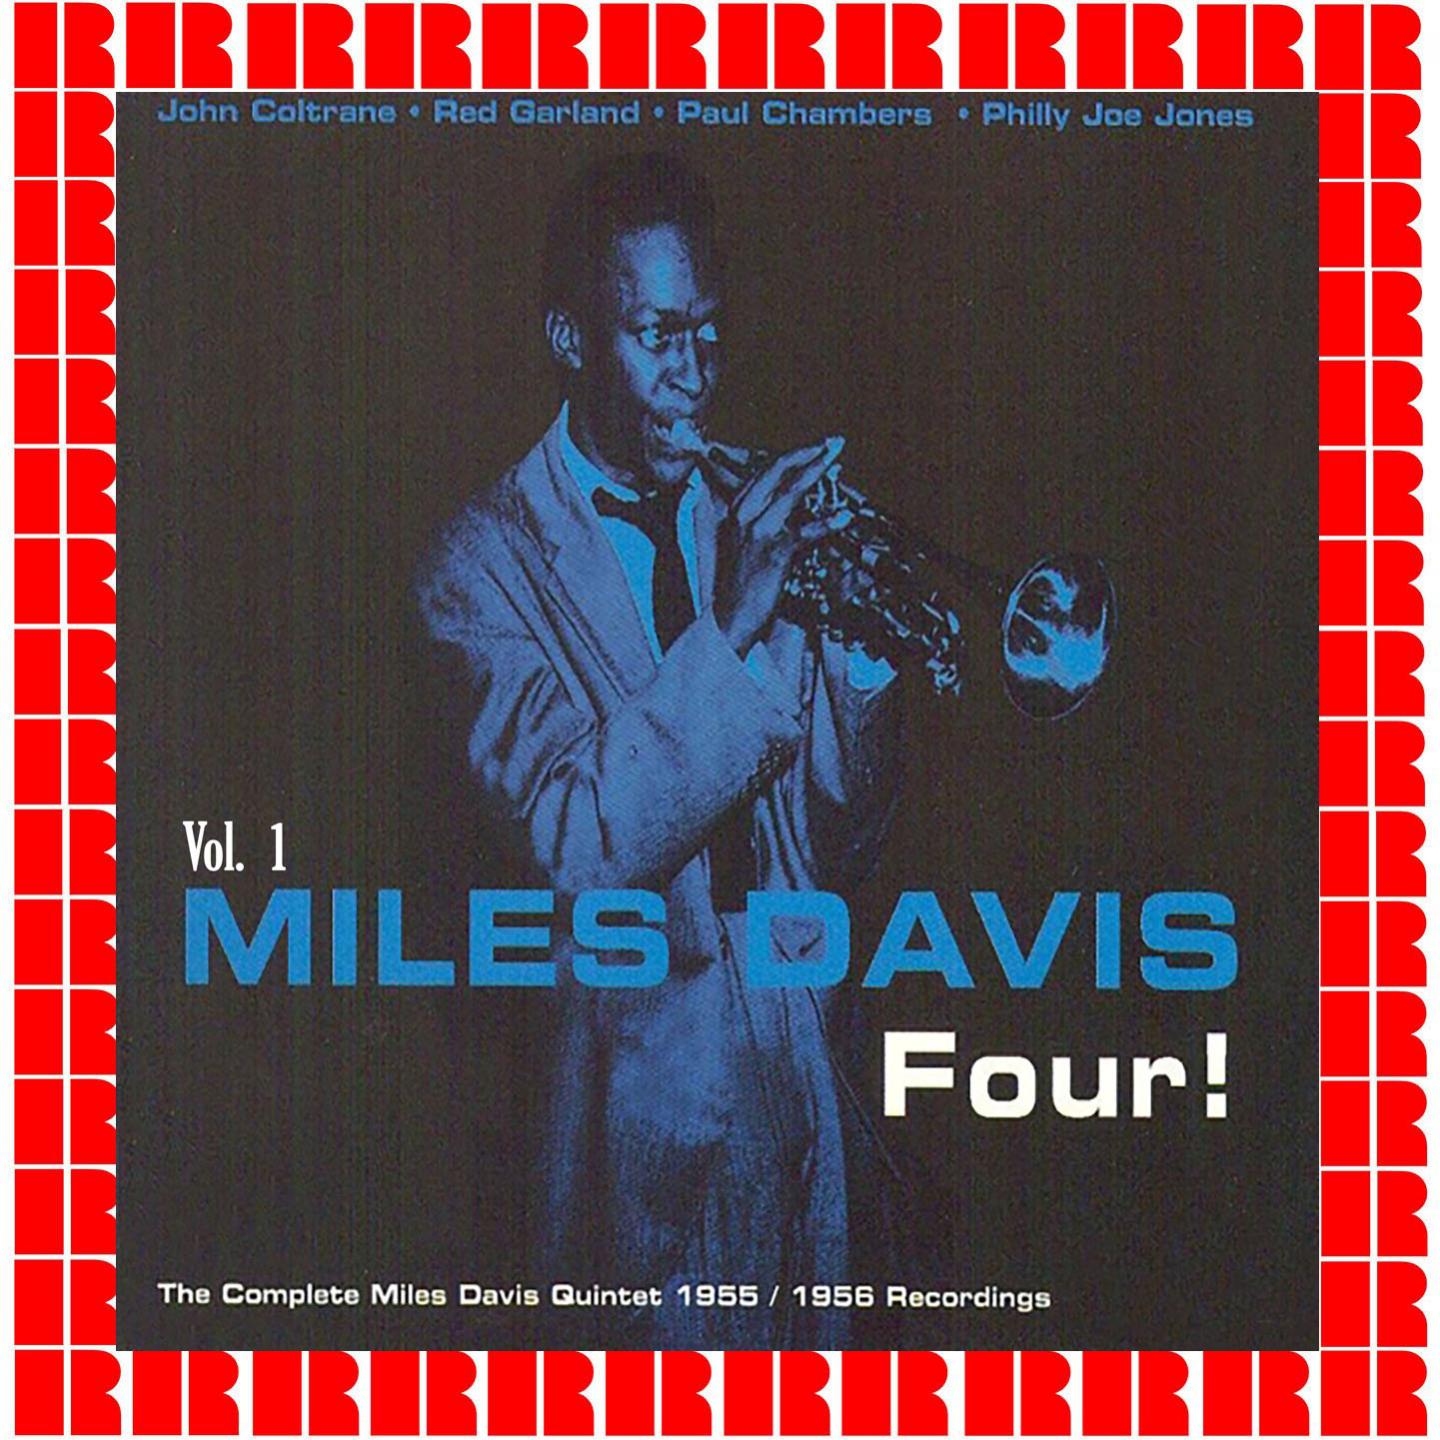 Four! The Complete Miles Davis Quintet 1955-1956 Recordings, Vol. 1 (Hd Remastered Edition)专辑